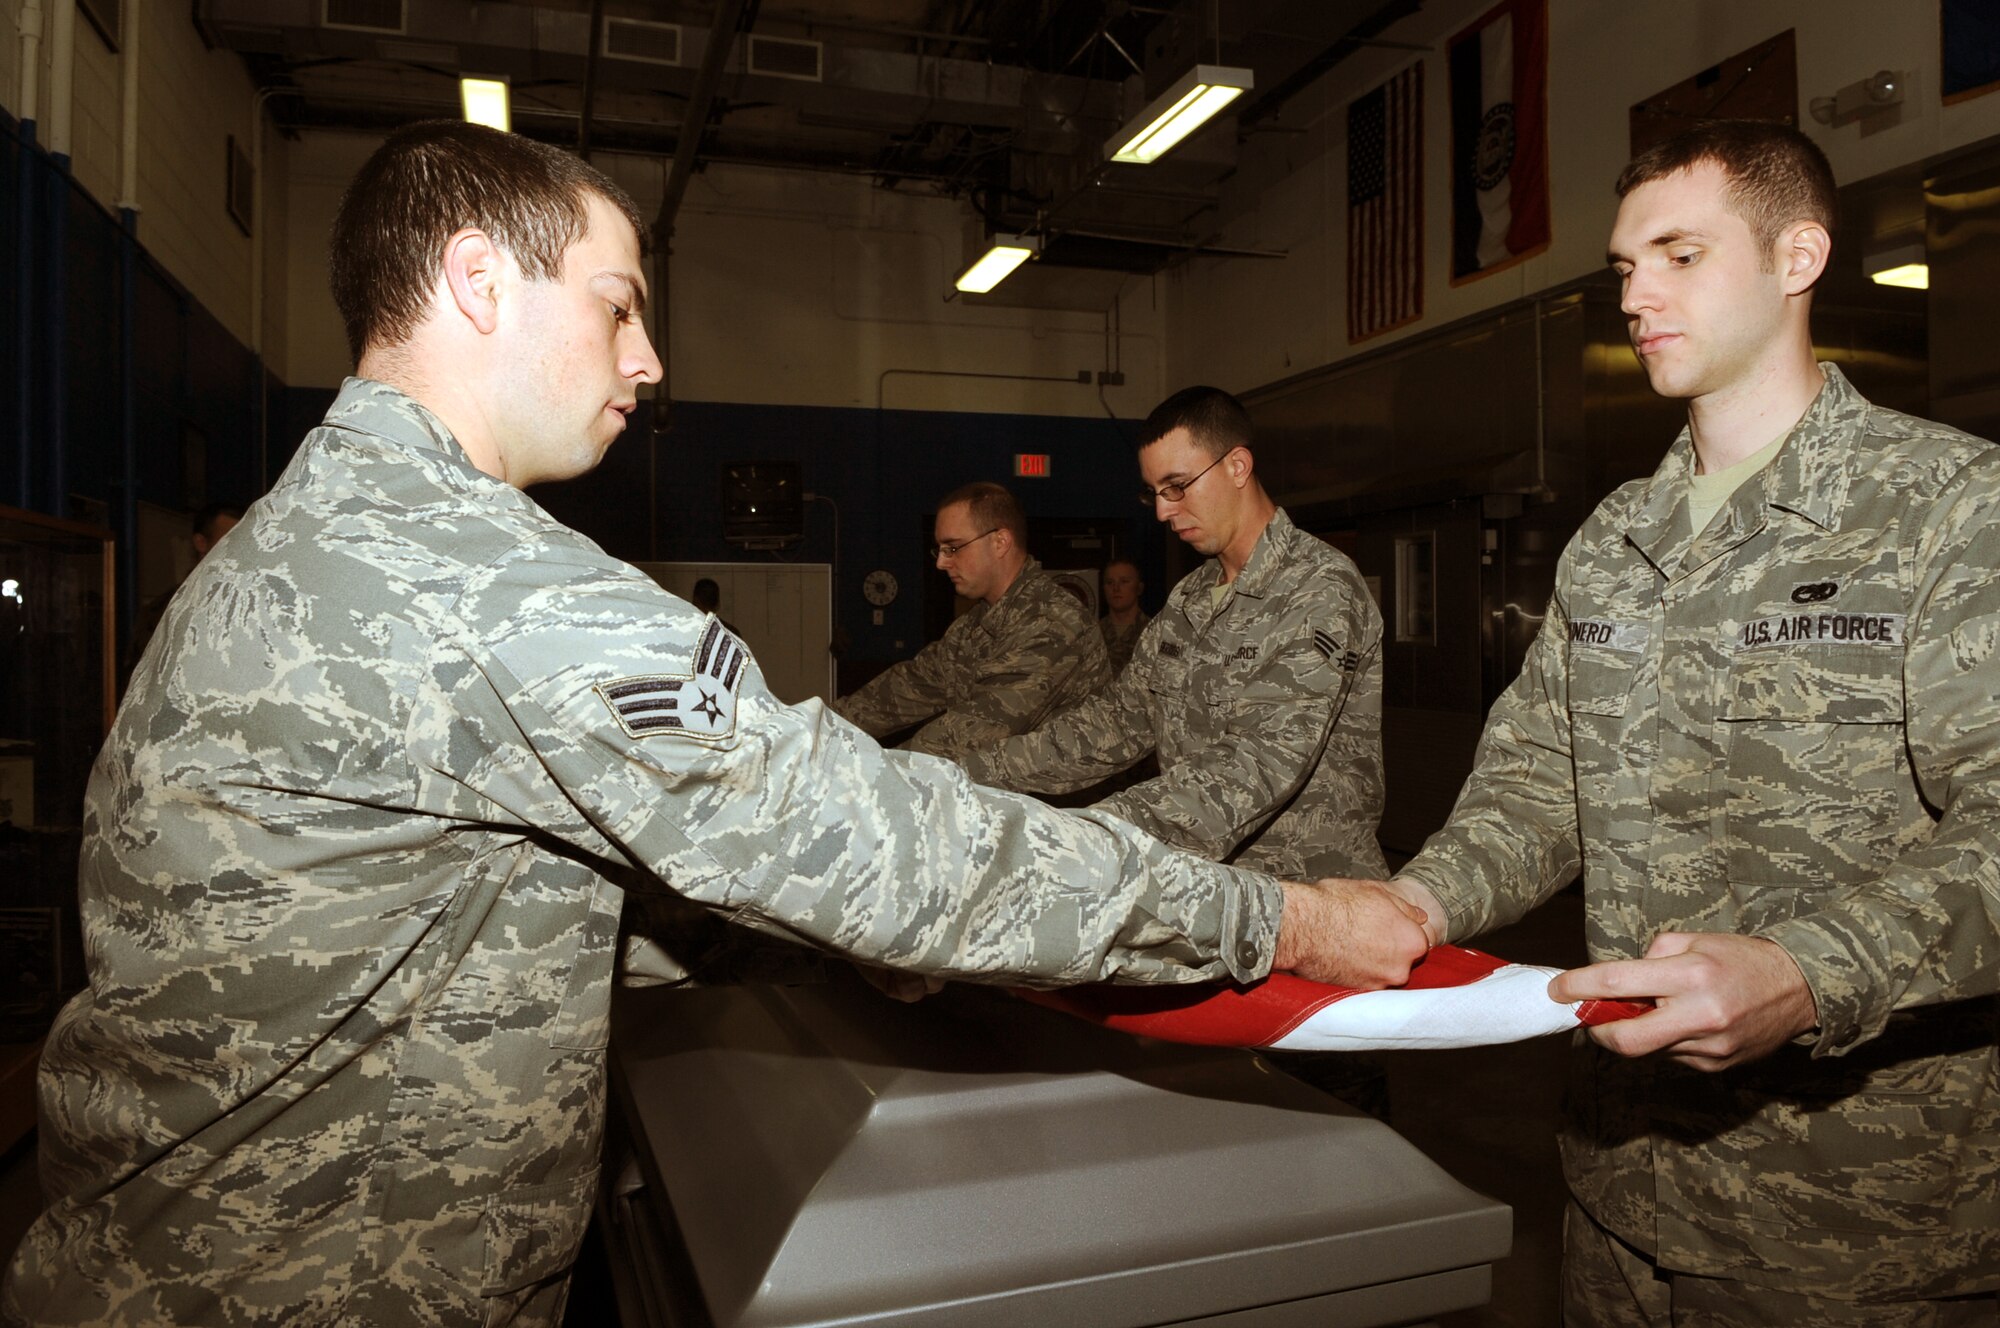 Whiteman Honor Guard members Senior Airman Geoffrey Russel, 509th Civil Engineer Squadron, and Senior Airman Cory Reinerd, 509th Aircraft Maintenance Squadron, ceremoniously fold the American flag as they practice for a funeral detail, here Tuesday, Jan. 26.  The Honor Guard provides a final tribute on behalf of a grateful Nation, for those who have served their country in the Air Force.  (U.S. Air Force Photo / Senior Airman Corey Todd) (Released)